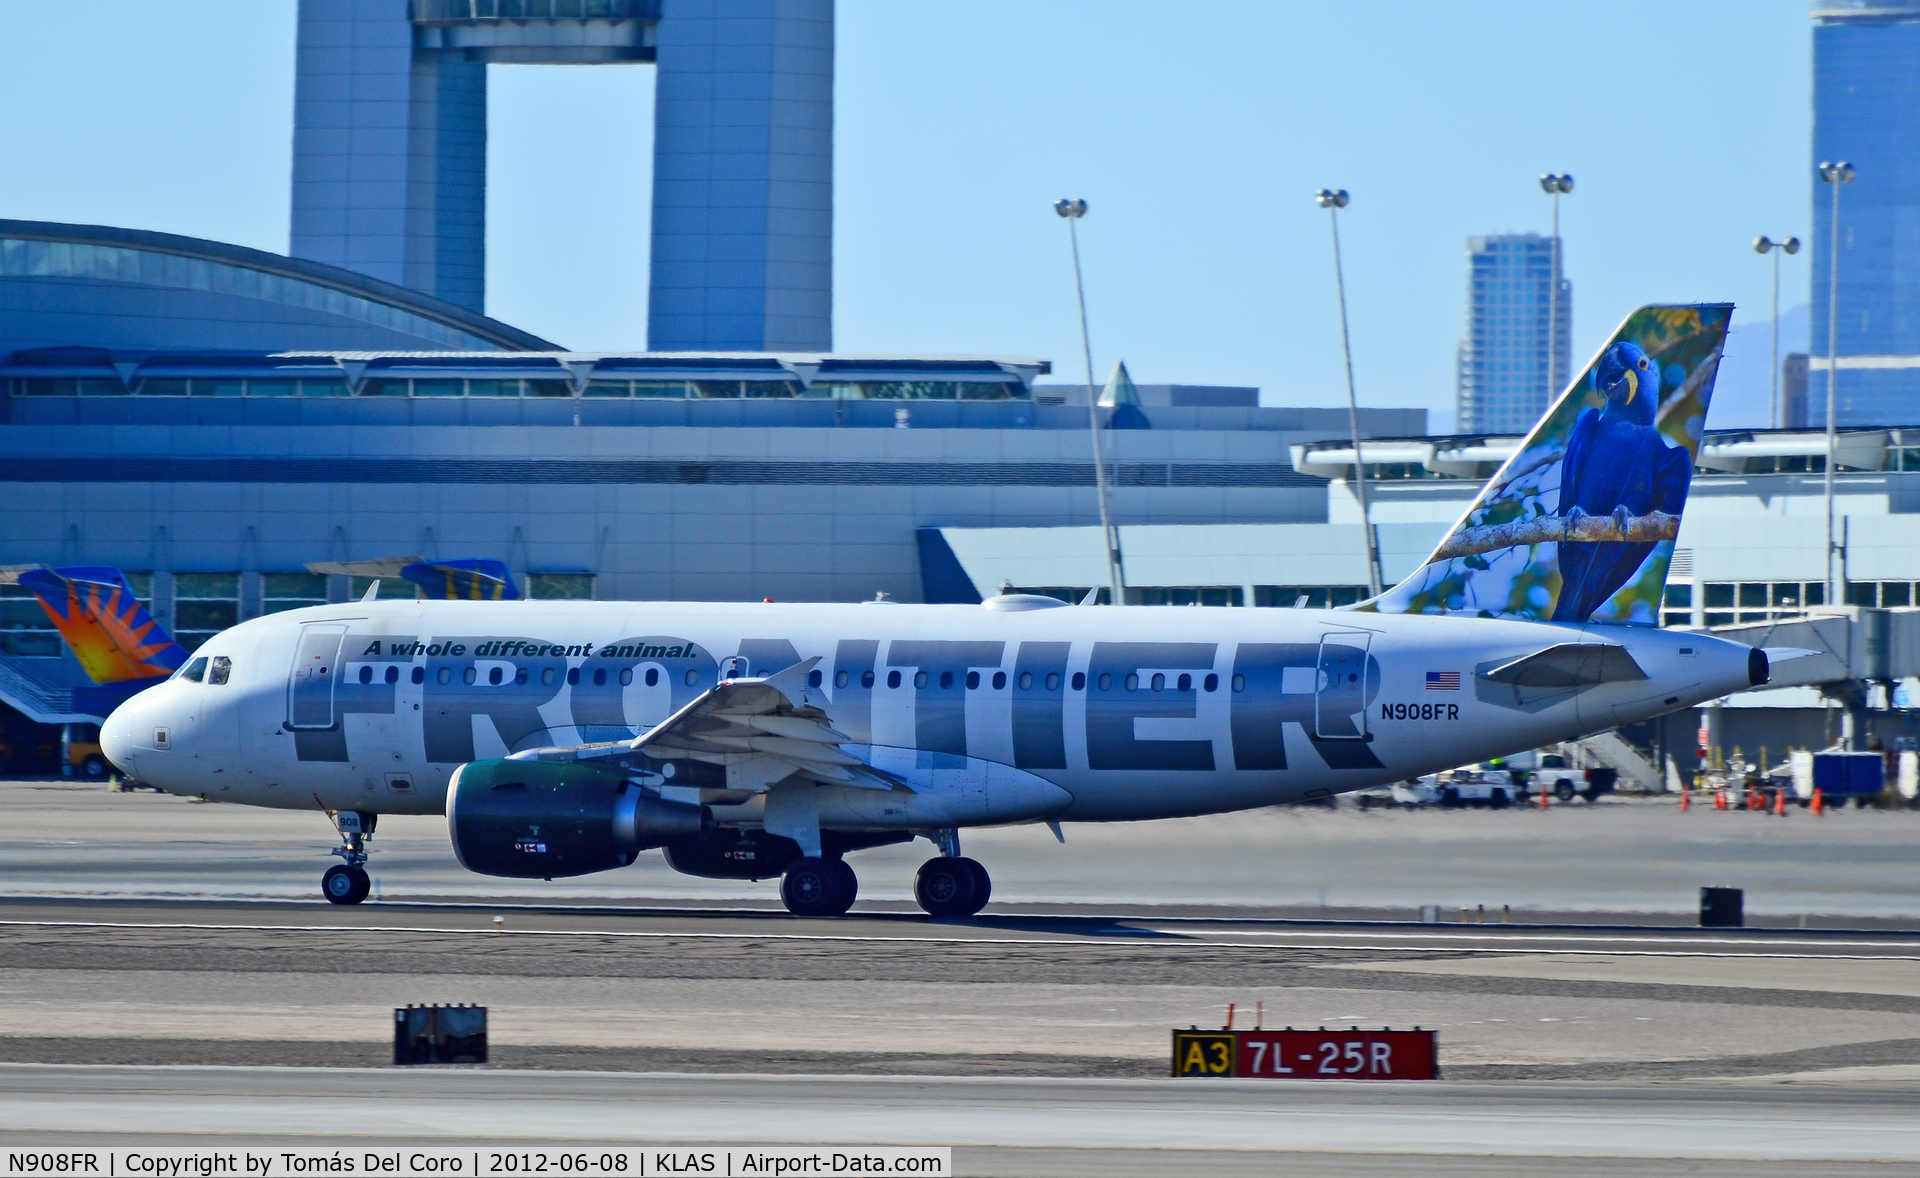 N908FR, 2002 Airbus A319-111 C/N 1759, N908FR Frontier Airlines Airbus A319-111 / 908 (cn 1759)

Frontier change the 